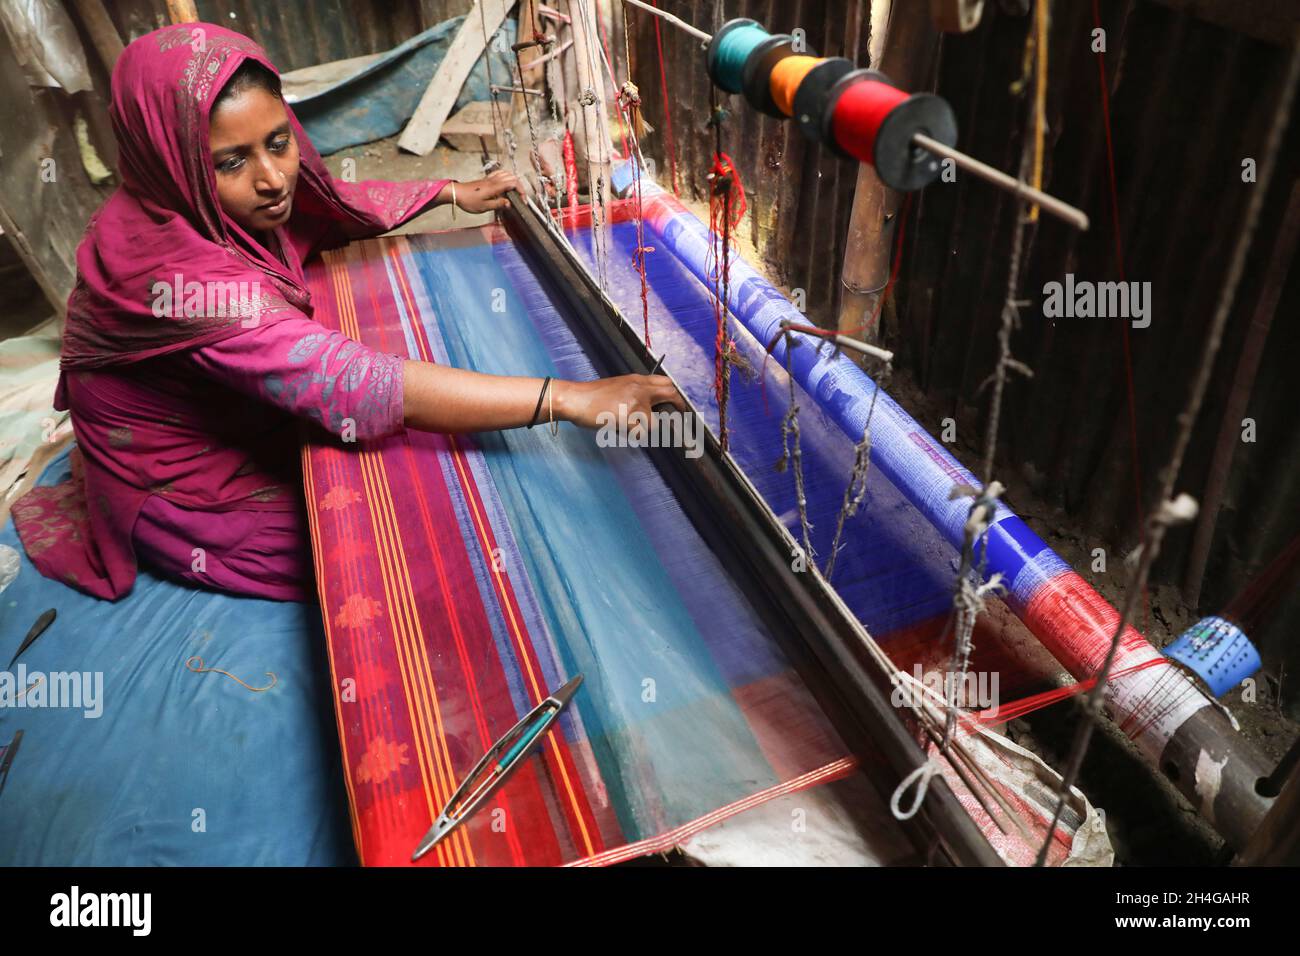 Dhaka, Bangladesh. 02nd Nov, 2021. Rina Begum seen making Jamdani saree at Demra Jamdani Palli. Jamdani is one of the finest muslin textiels of Bengal, produced in Dhaka District, Bangladesh for centuries. The Historic production of jamdani was patronized by imperial warrants of the Mughal emperors. Under British colonialism, the Bengali Jamdani and muslin industries rapidly declined due to colonial import policies favoring industrially manufactured textiles. (Photo by Md Manik/SOPA Images/Sipa USA) Credit: Sipa USA/Alamy Live News Stock Photo